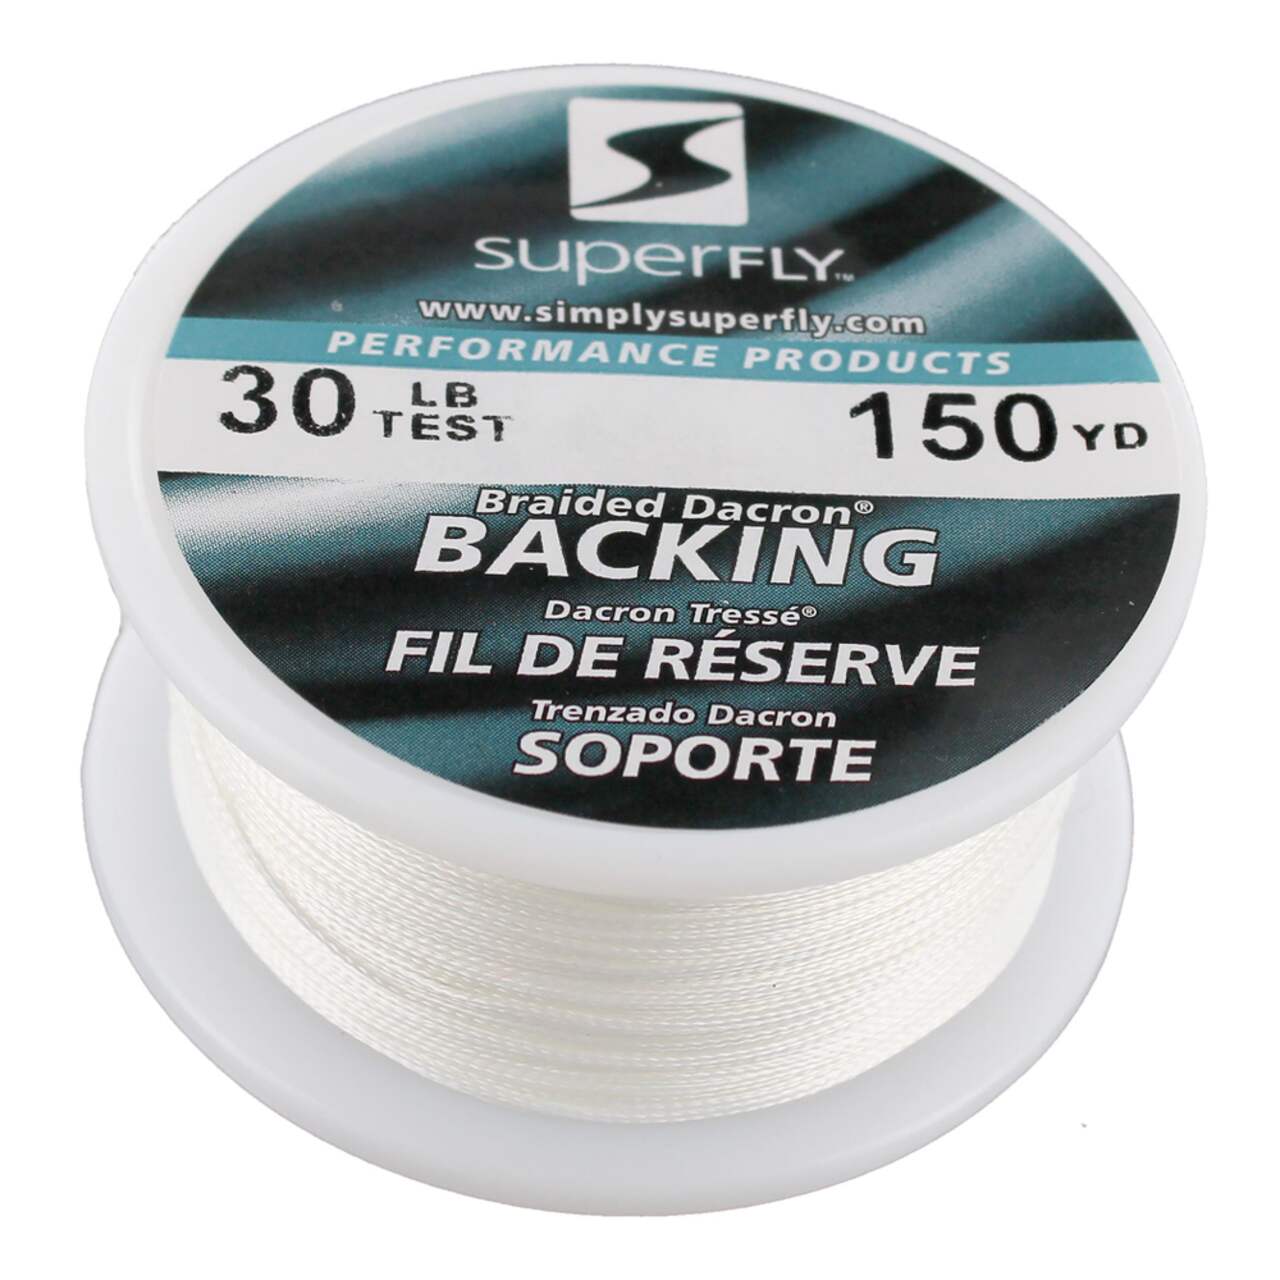 https://media-www.canadiantire.ca/product/playing/fishing/fishing-equipment/1782154/superfly-braided-backing-fly-line-white-30lb-150-yards-a2e720f1-aa4d-4aef-b01c-9c9a85fa5889.png?imdensity=1&imwidth=640&impolicy=mZoom